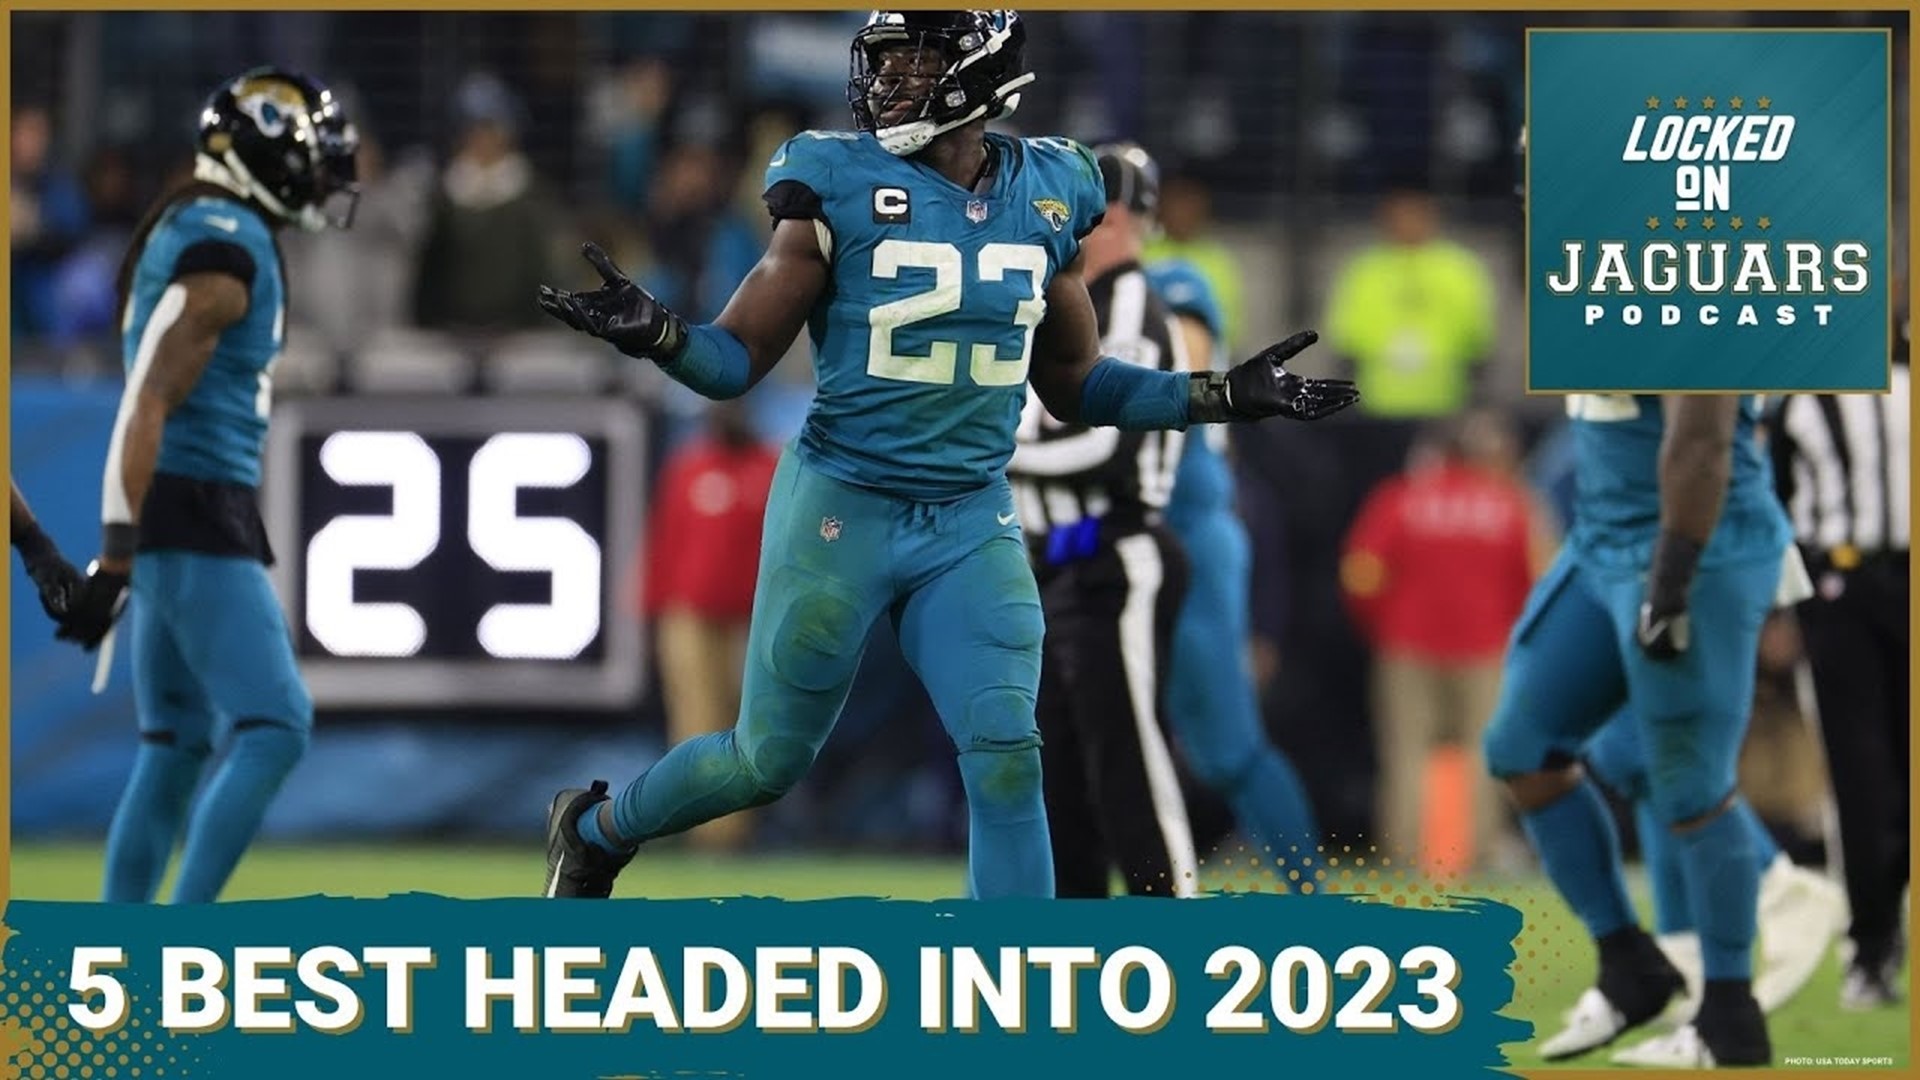 The top 5 players for the Jaguars is clear heading into 2023. There's also a top 5 who we hope steps up this year if the club is going to take a step forward.